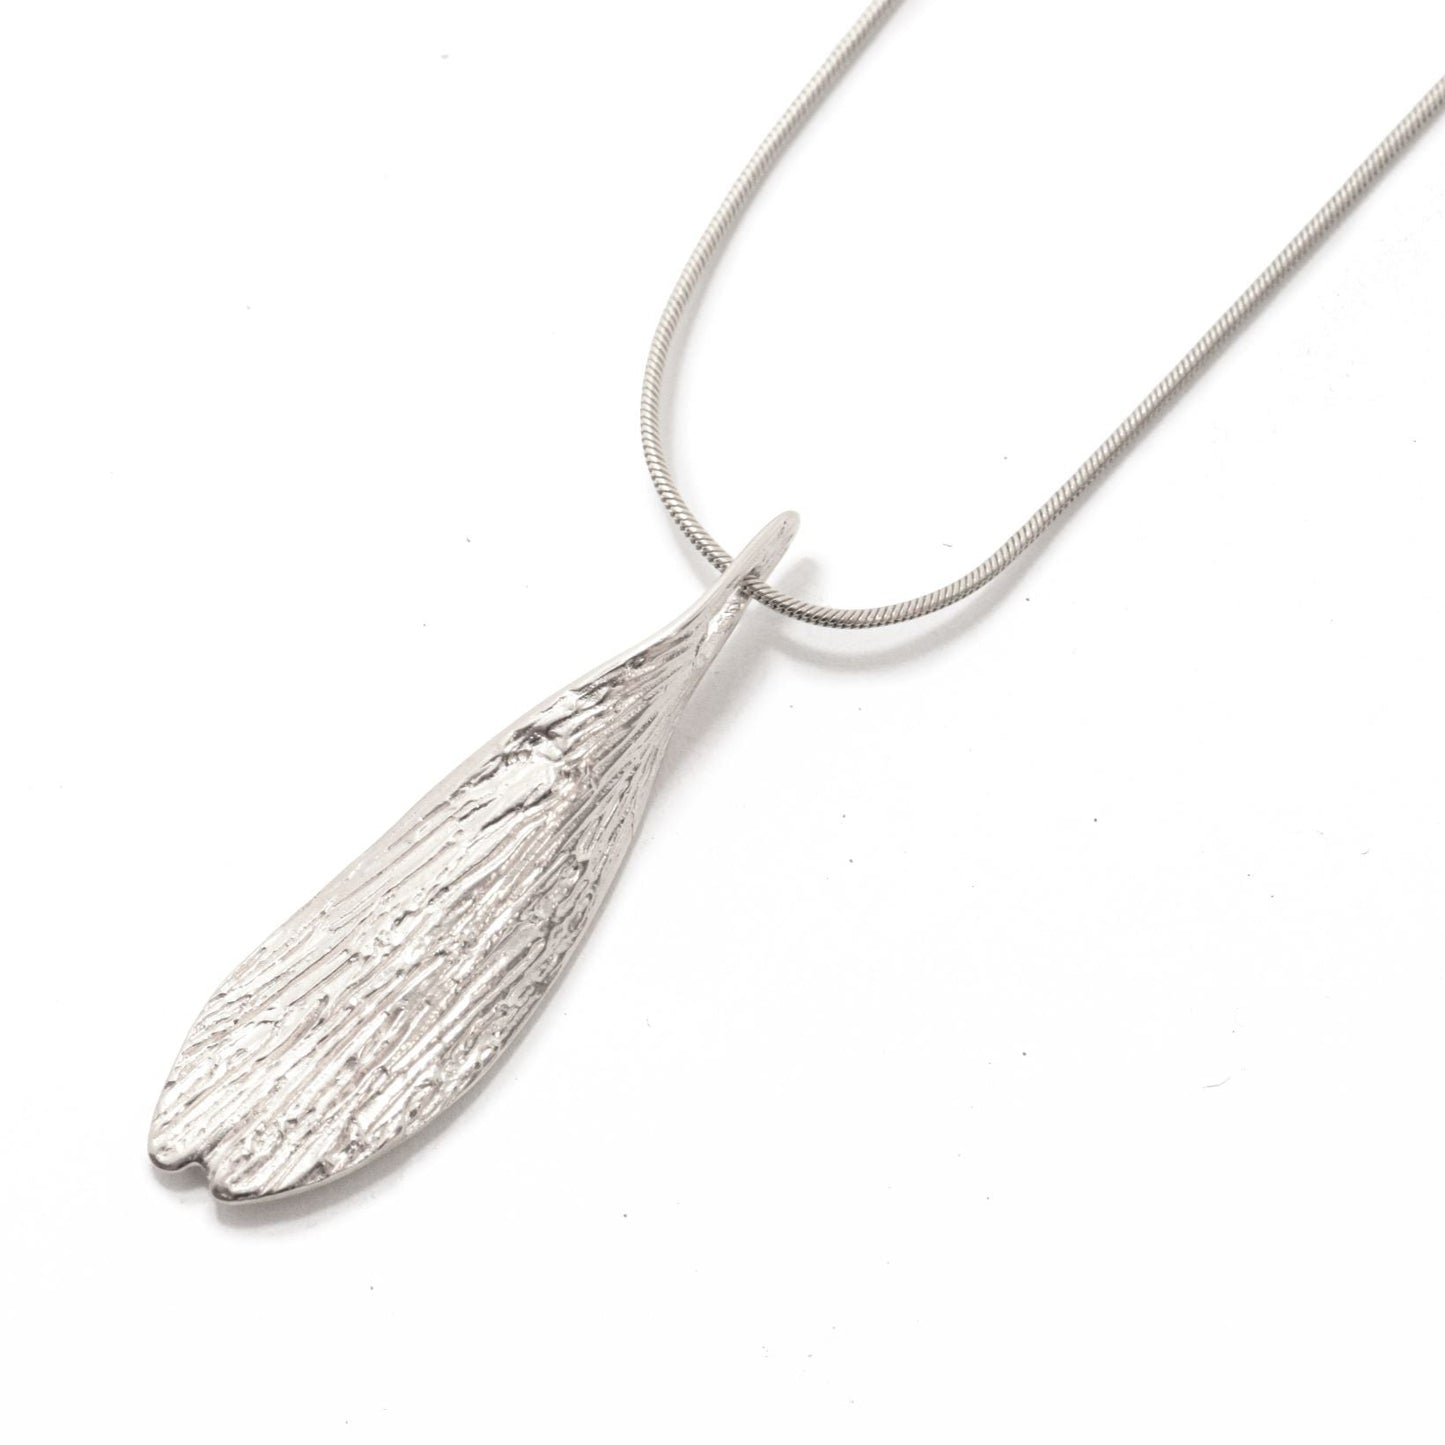 Twisted Dew Drop Pendant - silver